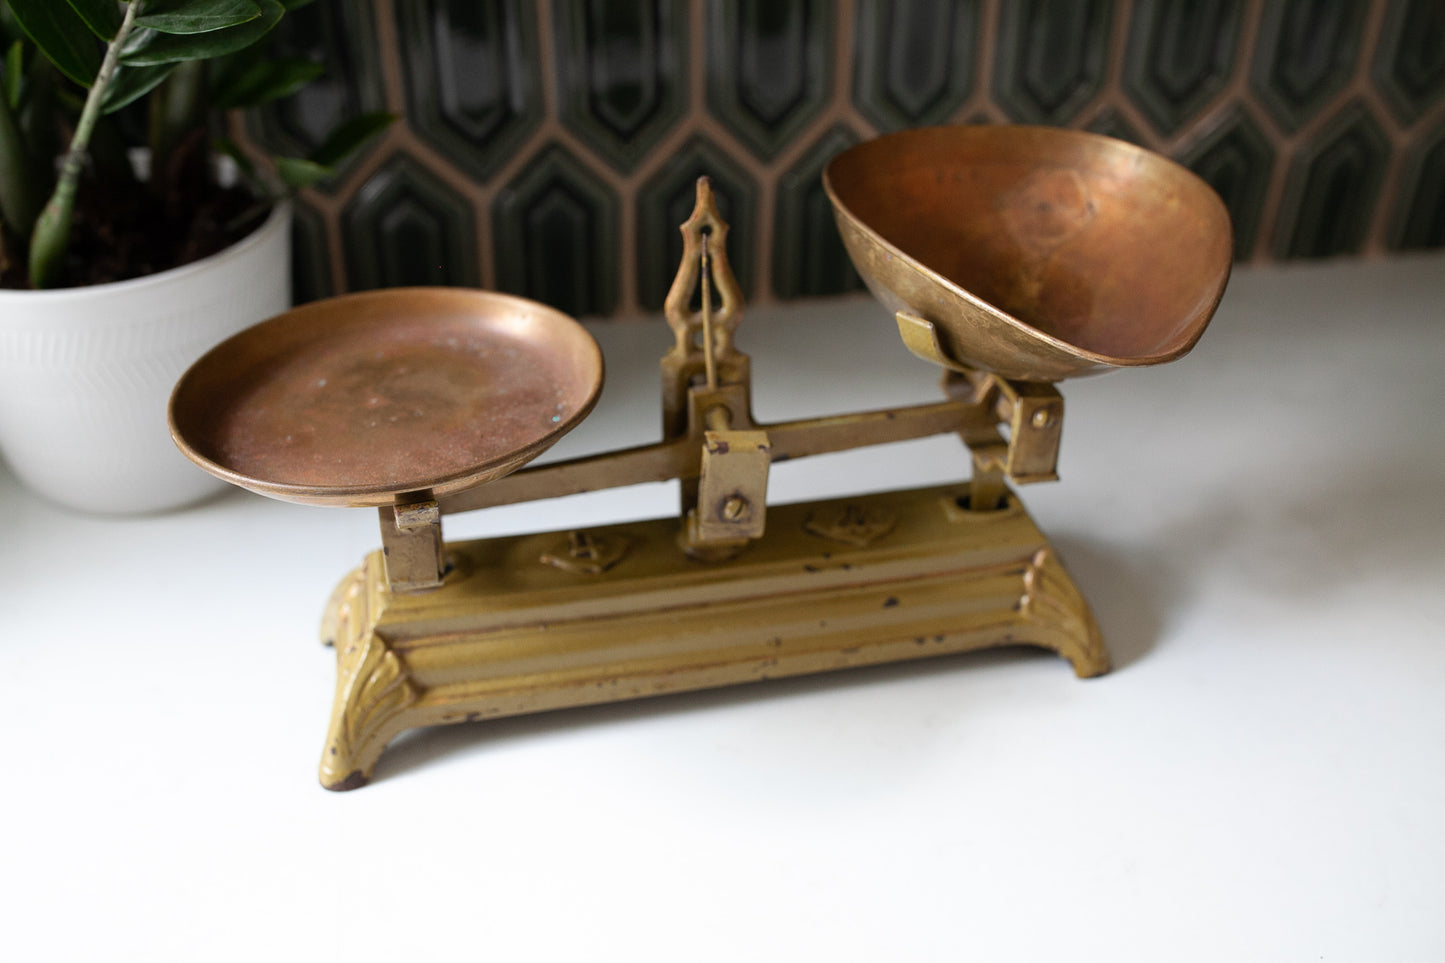 Antique Scale - Cast Iron Scale - Green and Copper Scale